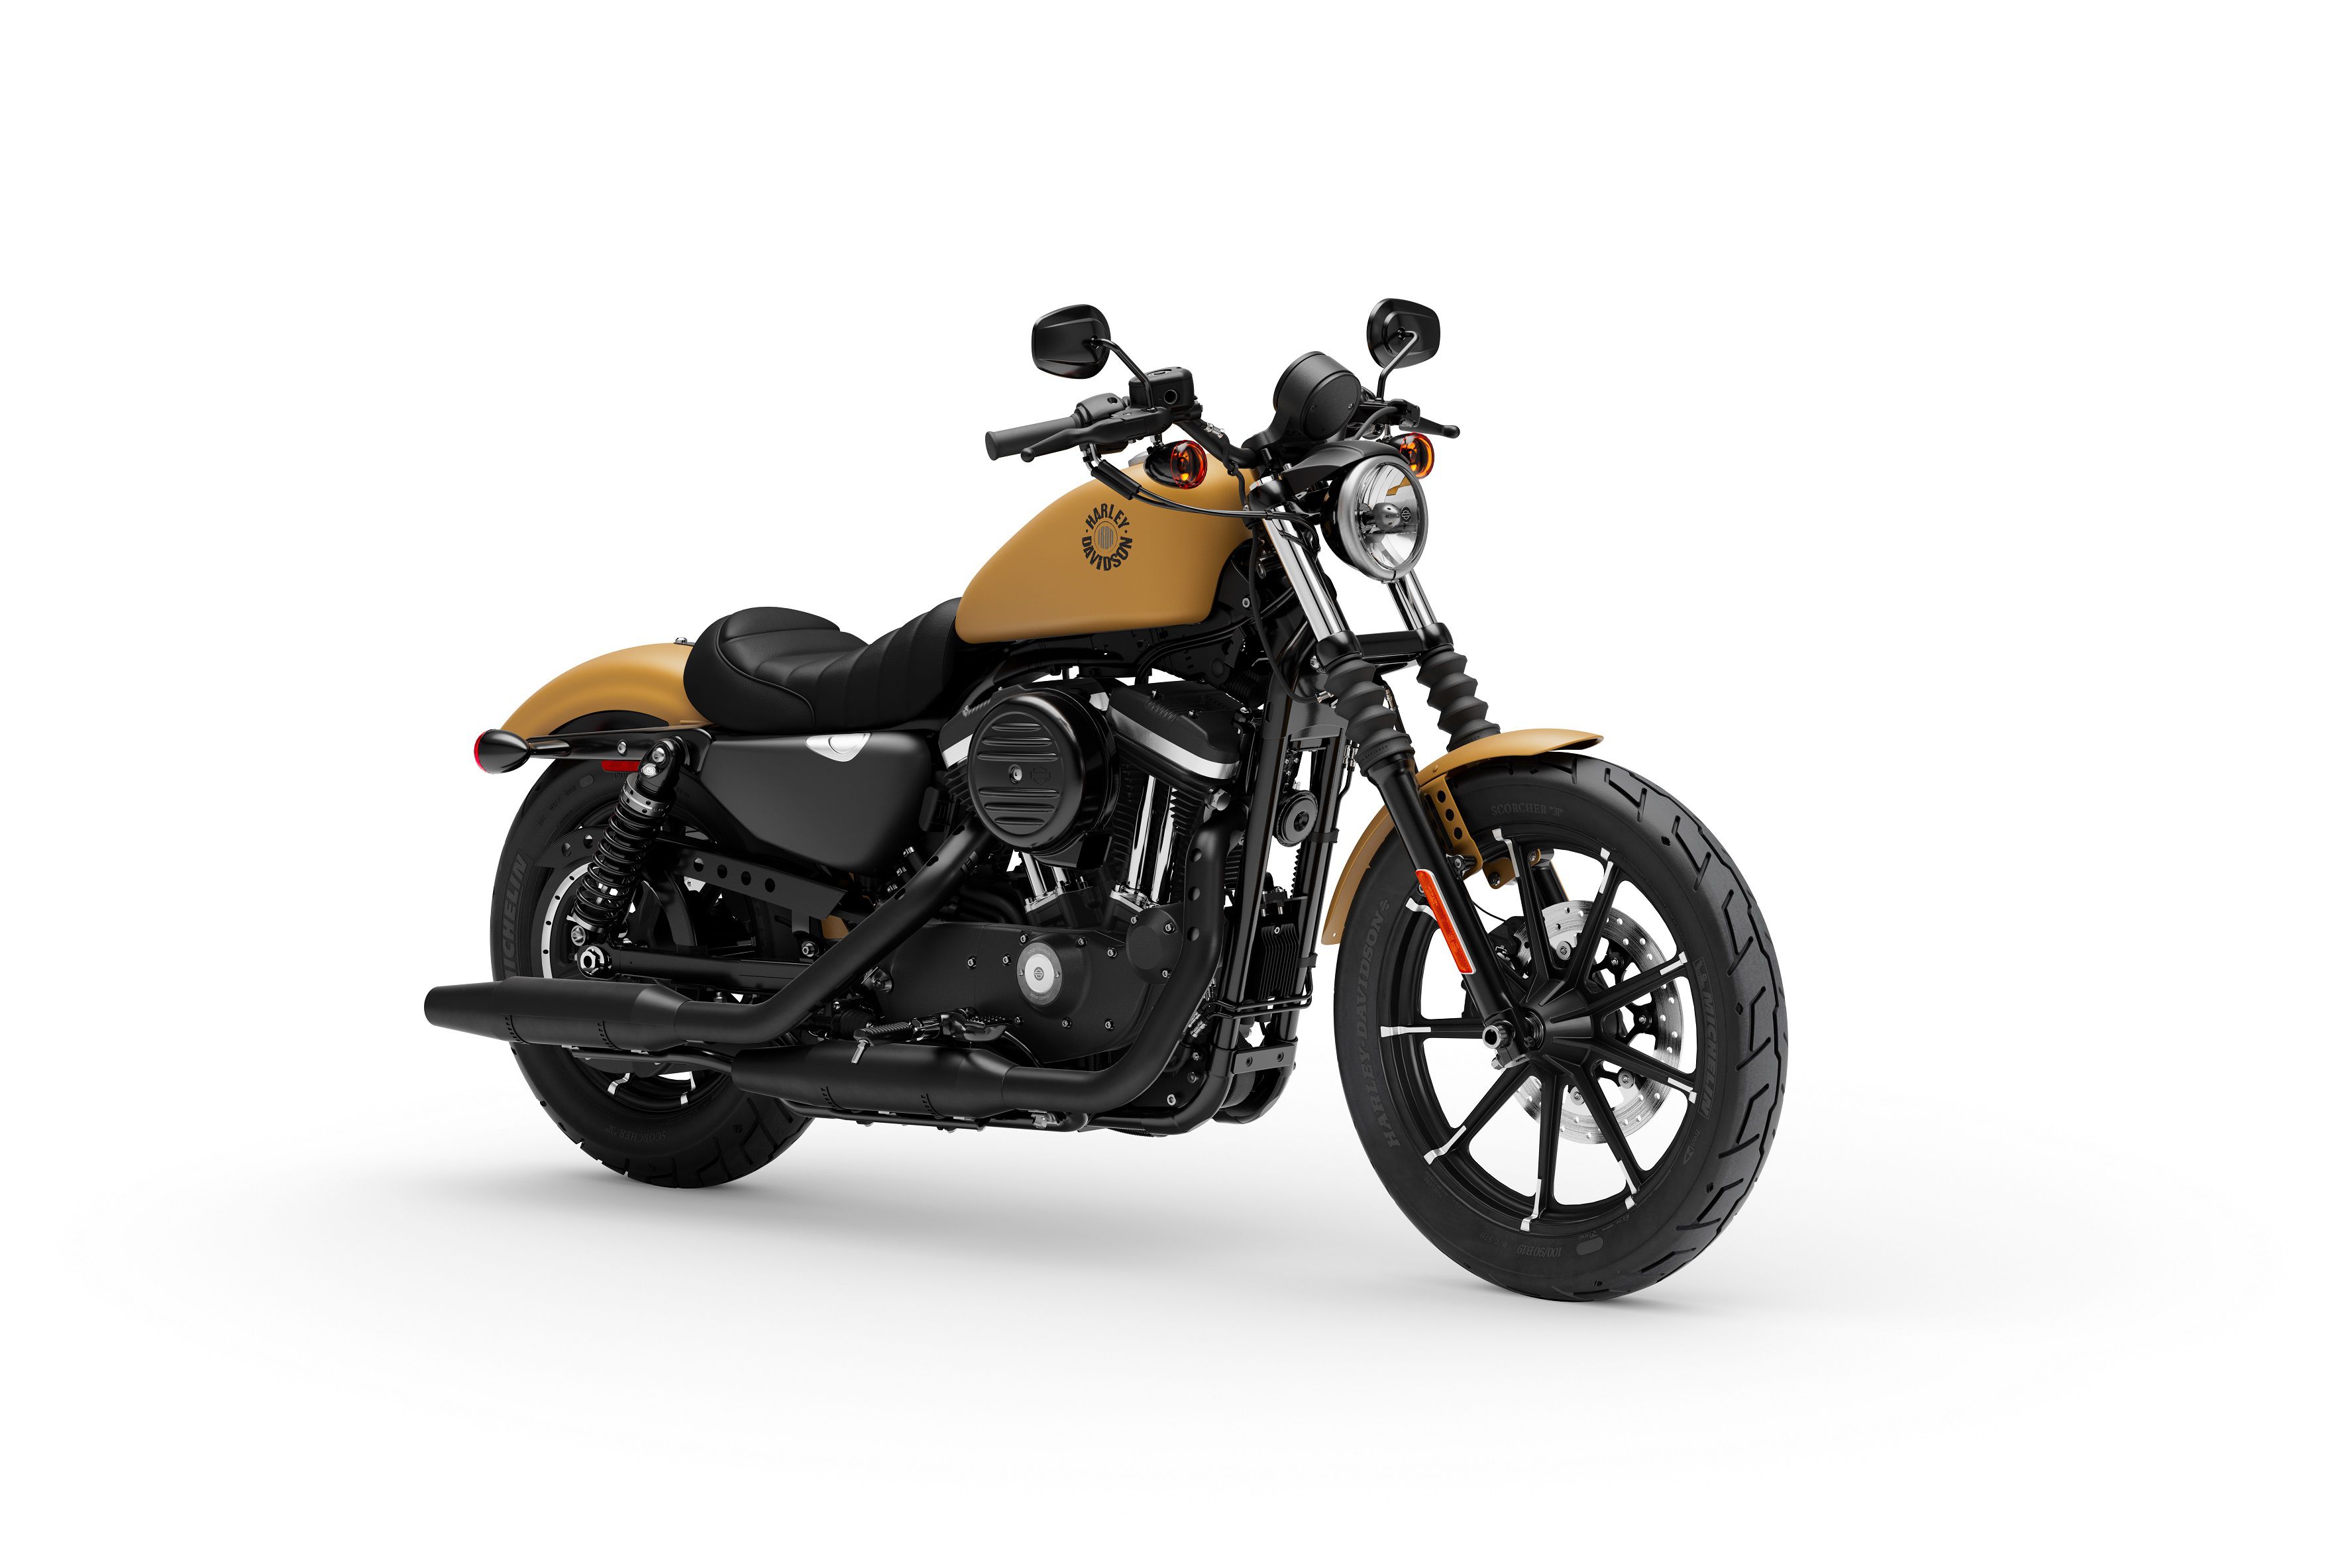 Iron 883 Weight Limit Promotion Off52